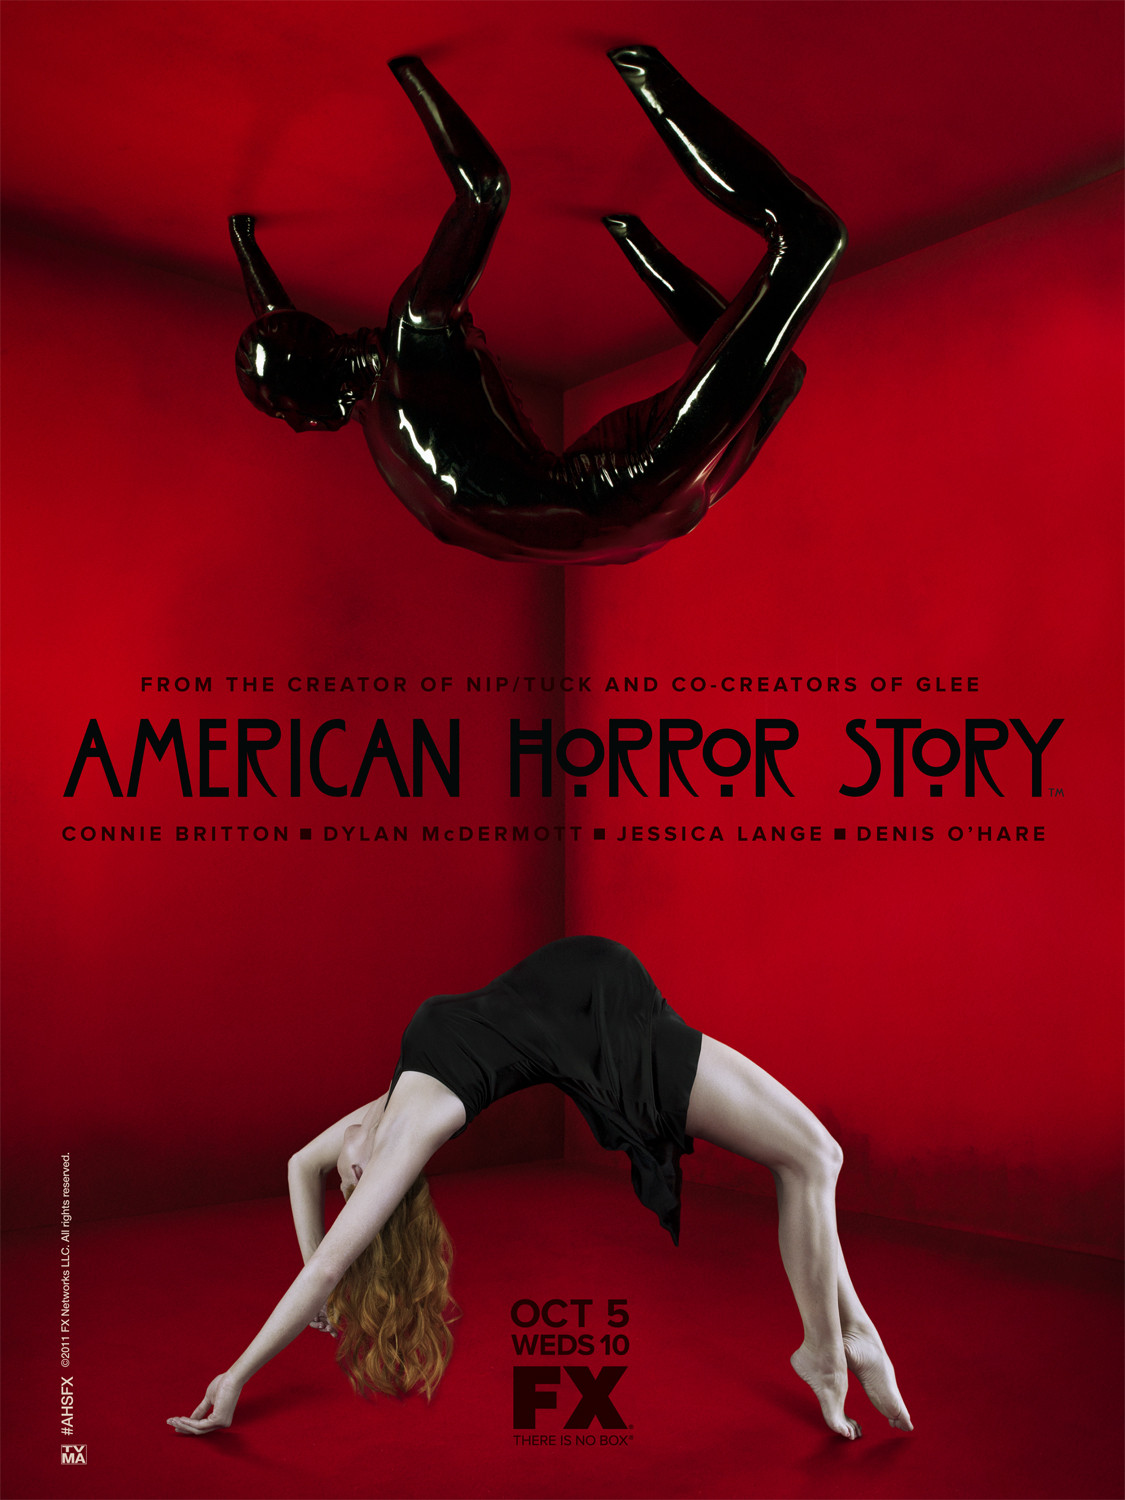 American Horror Story  Season 1  New Promotional Poster